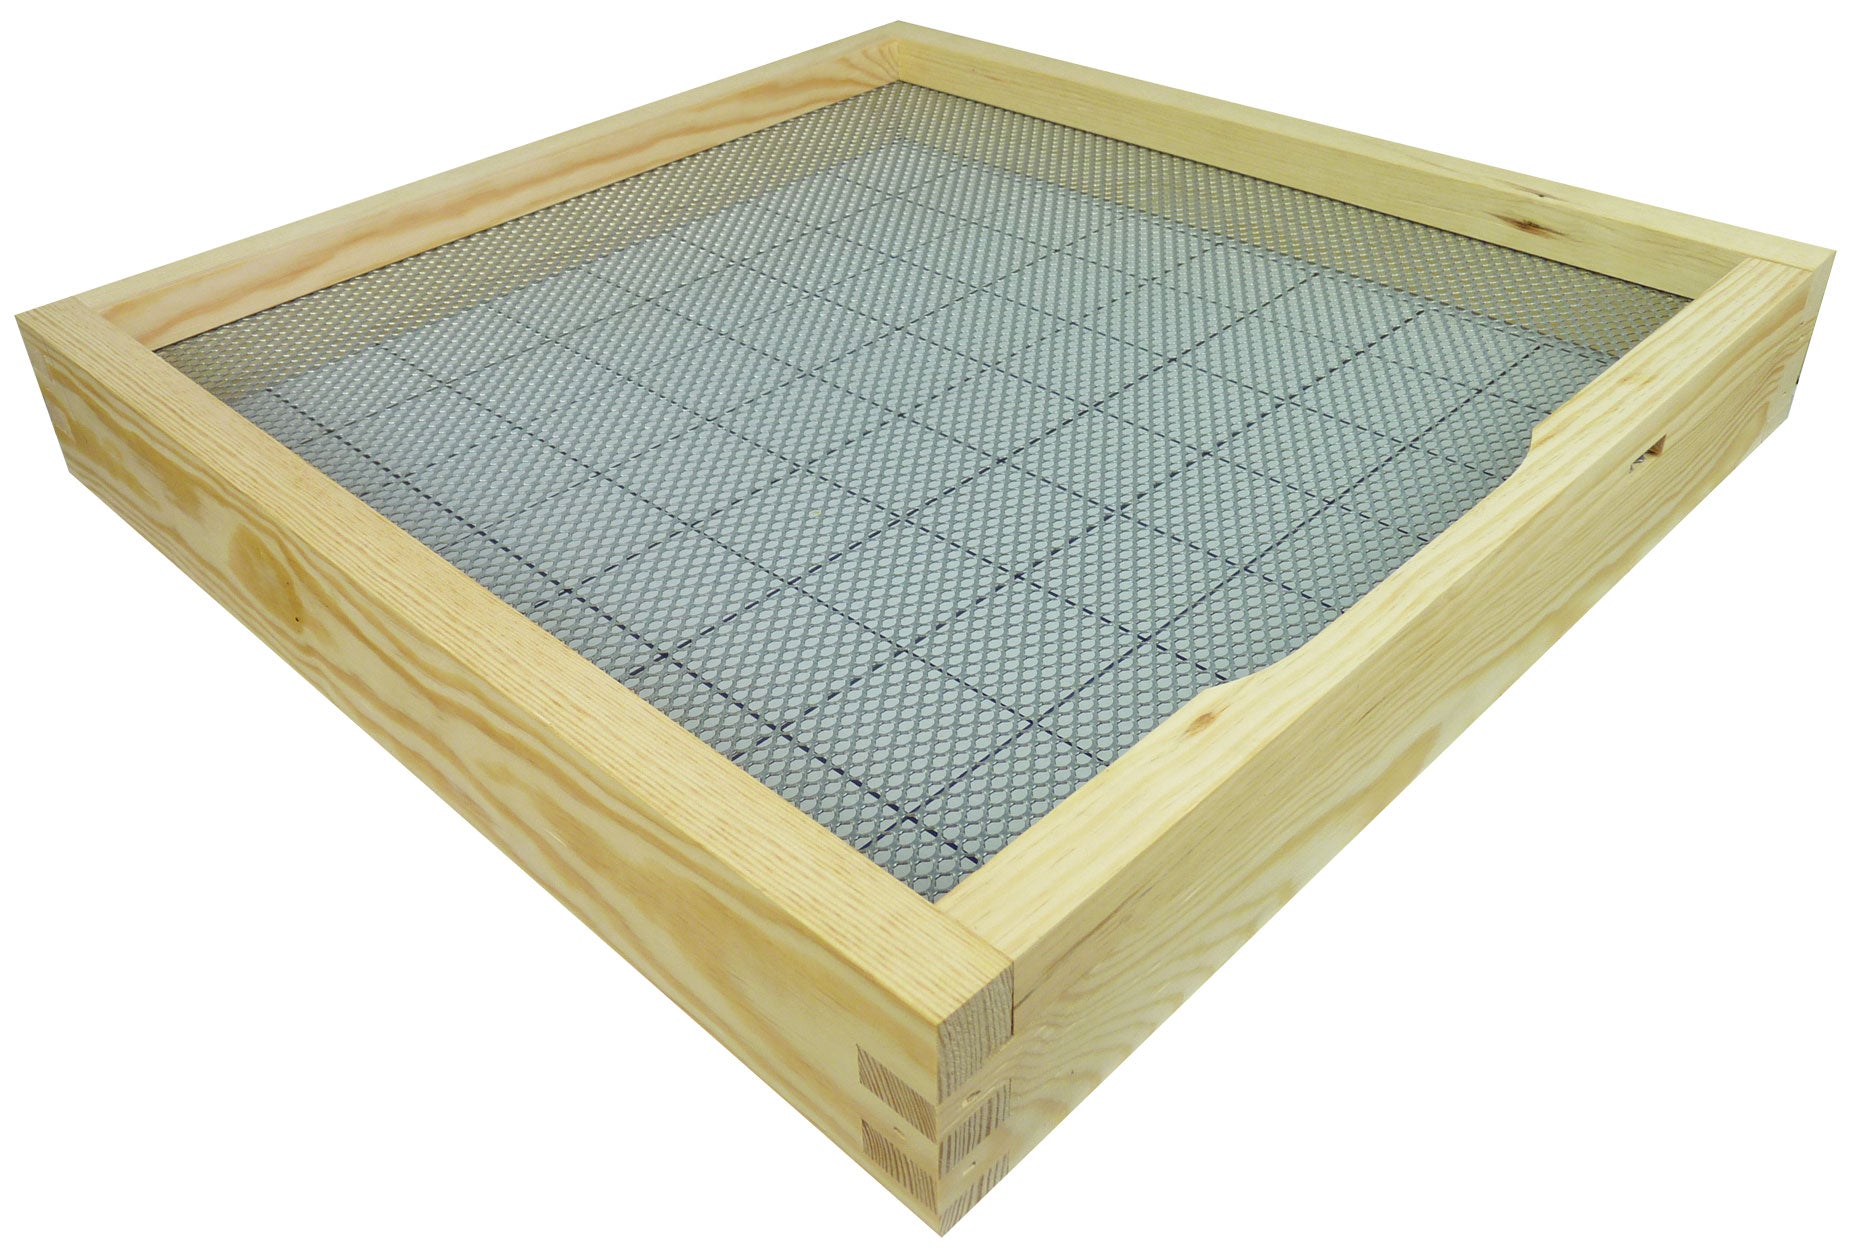 B.S. National Open Mesh Floor With Drawer And Entrance Block, Pine, Flat - Bee Equipment